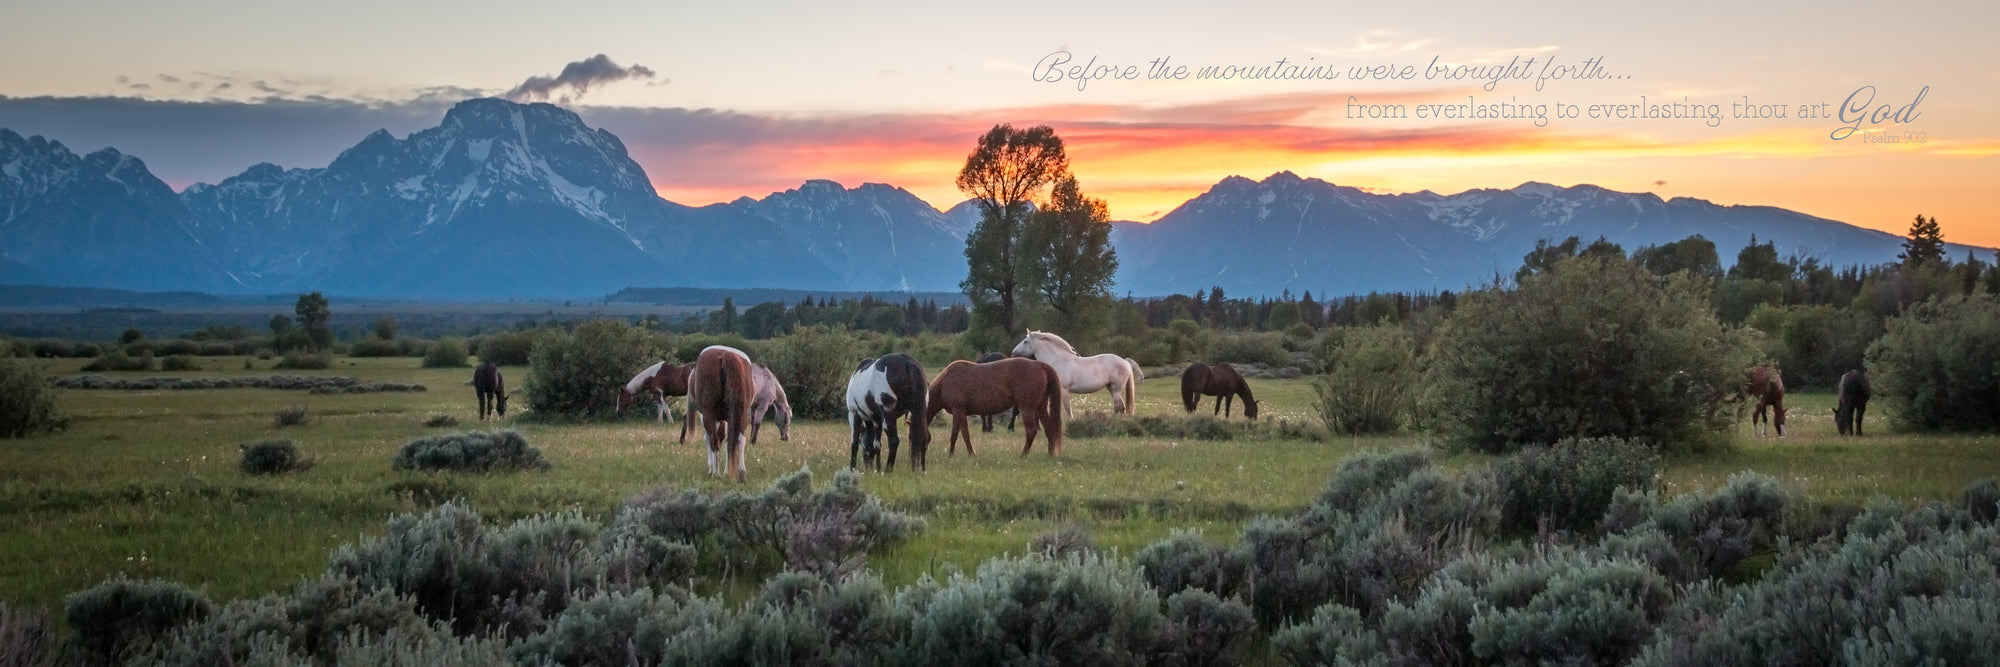 Horses grazing in pasture with Tetons in the distance during sunset